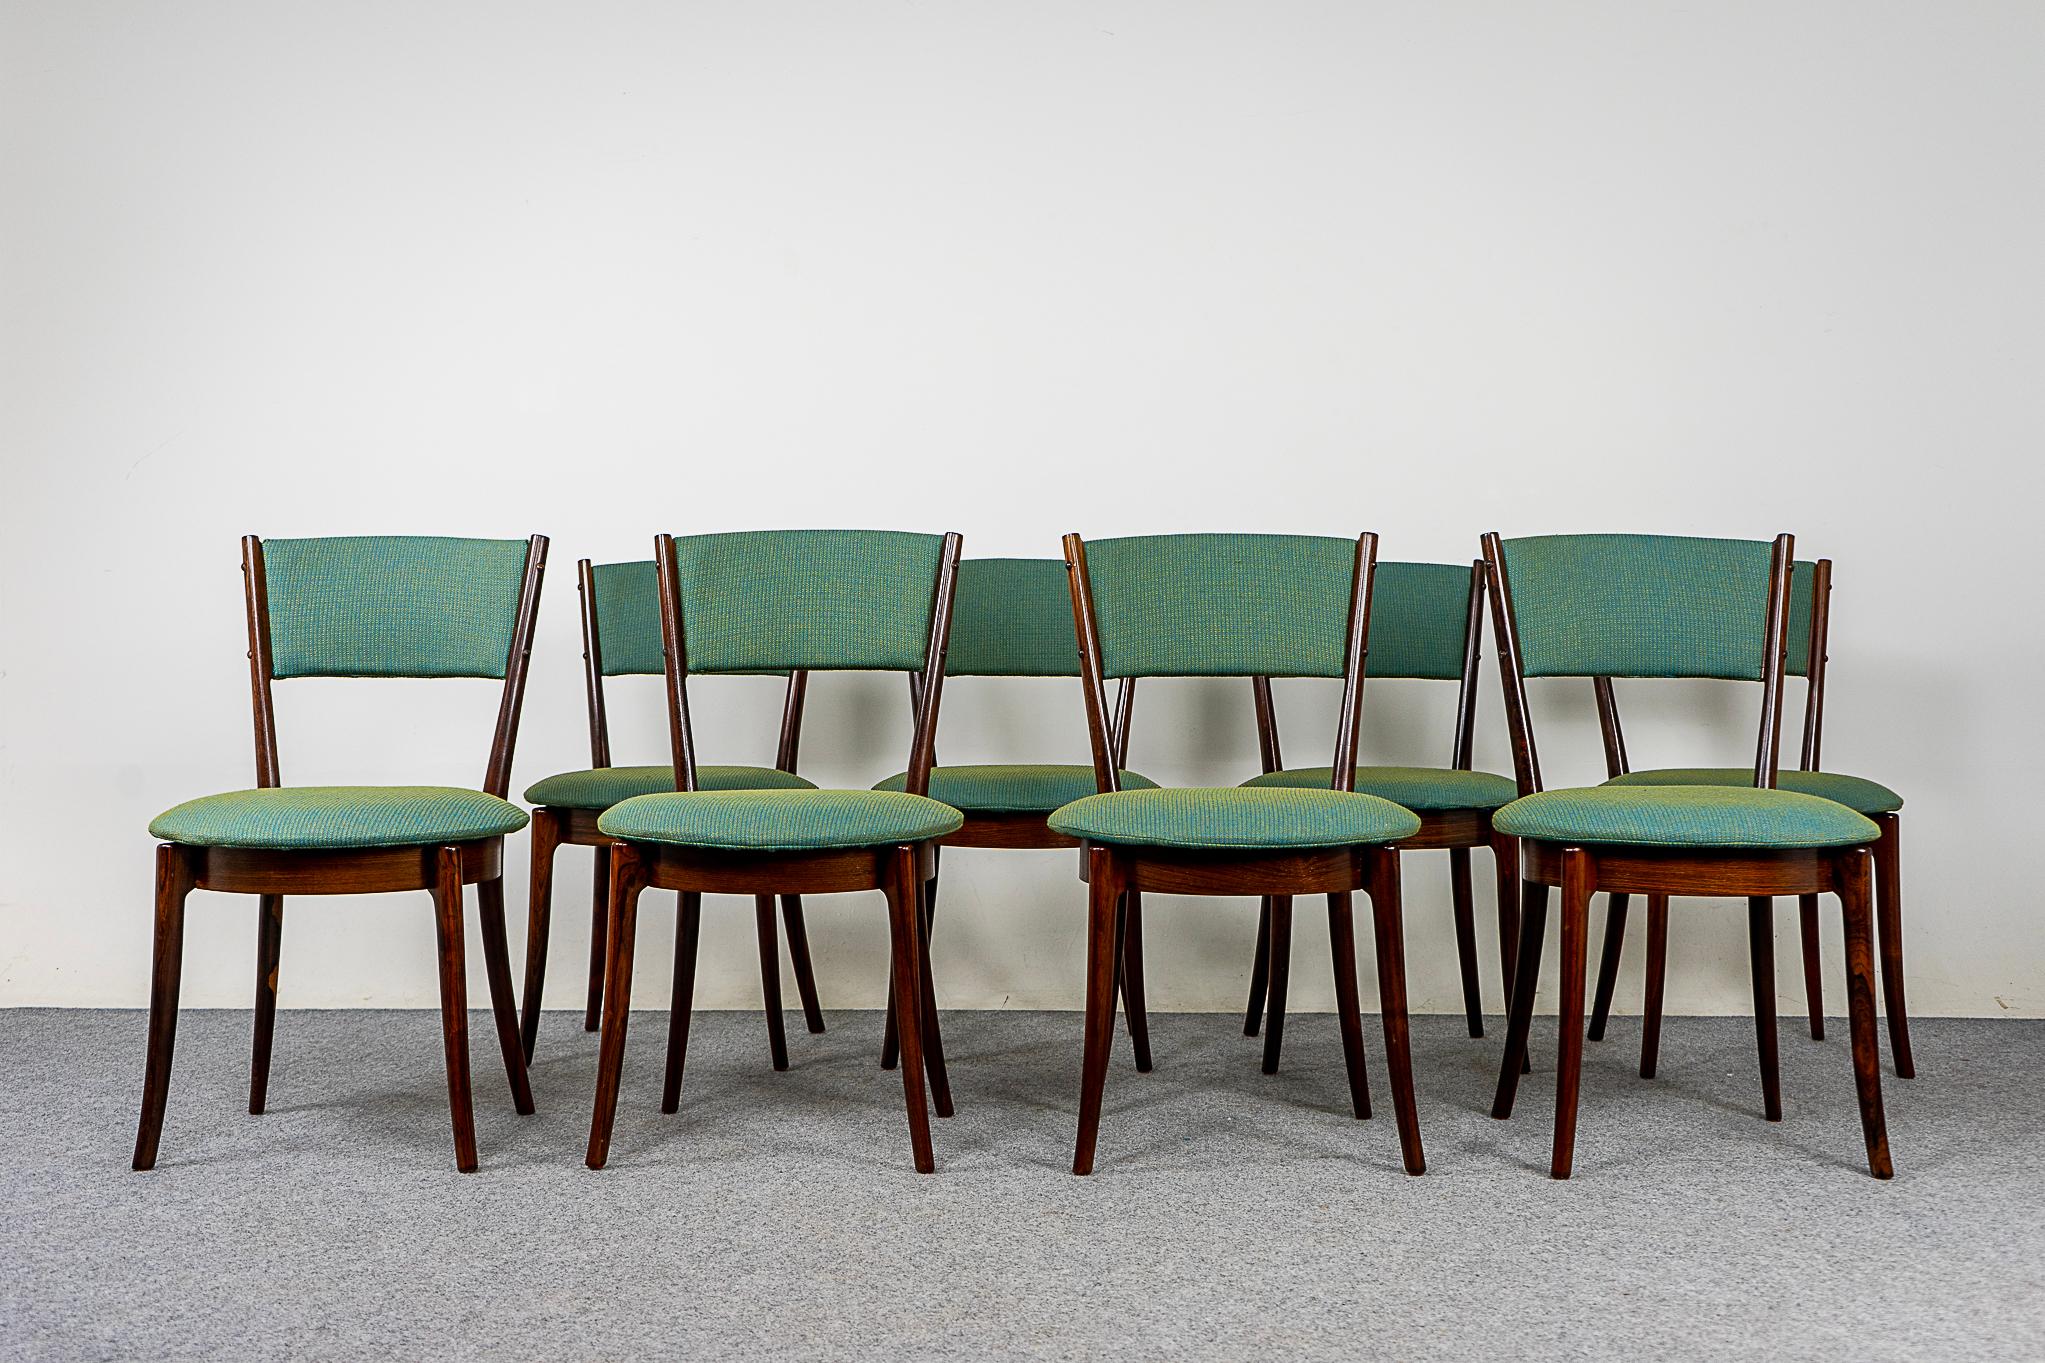 Set of 8 Danish Mid-Century Modern Rosewood Dining Chairs For Sale 4